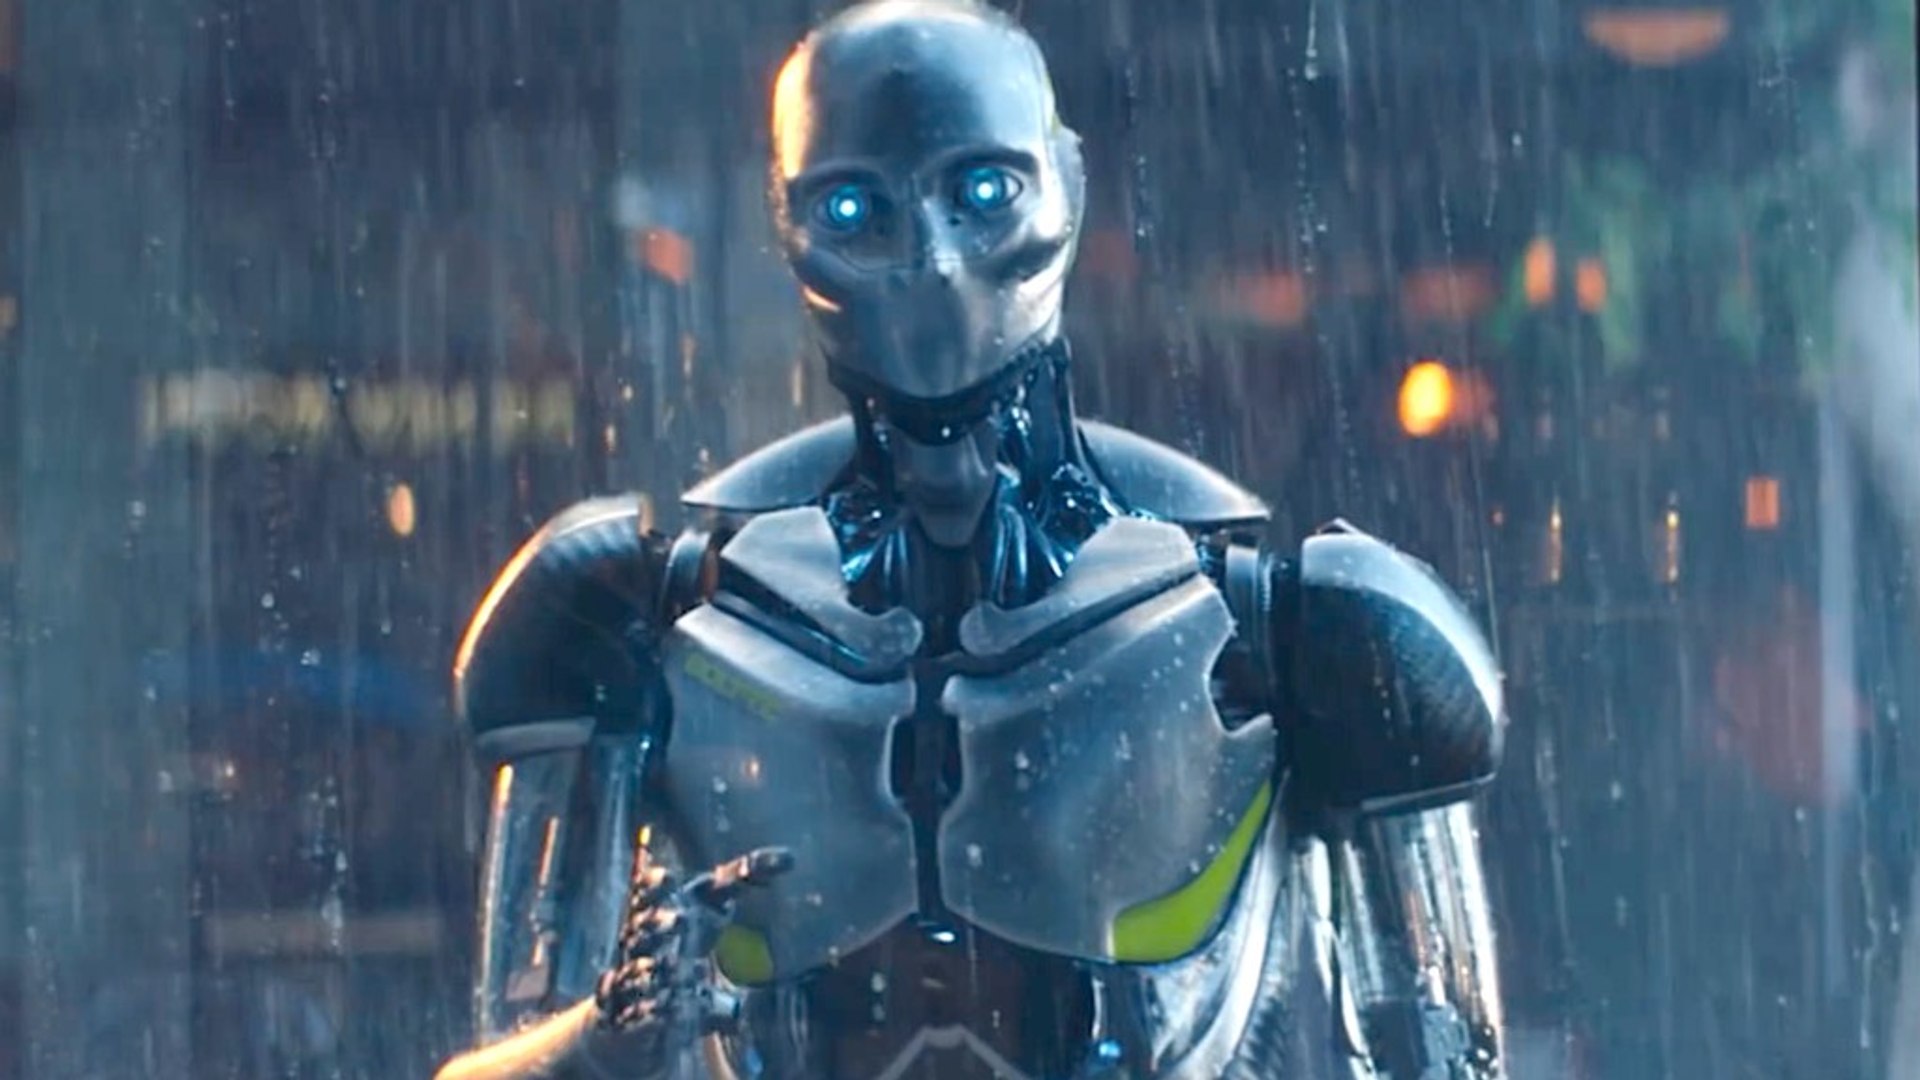 Michelob ULTRA "Robots" Super Bowl Commercial 2019 - video Dailymotion